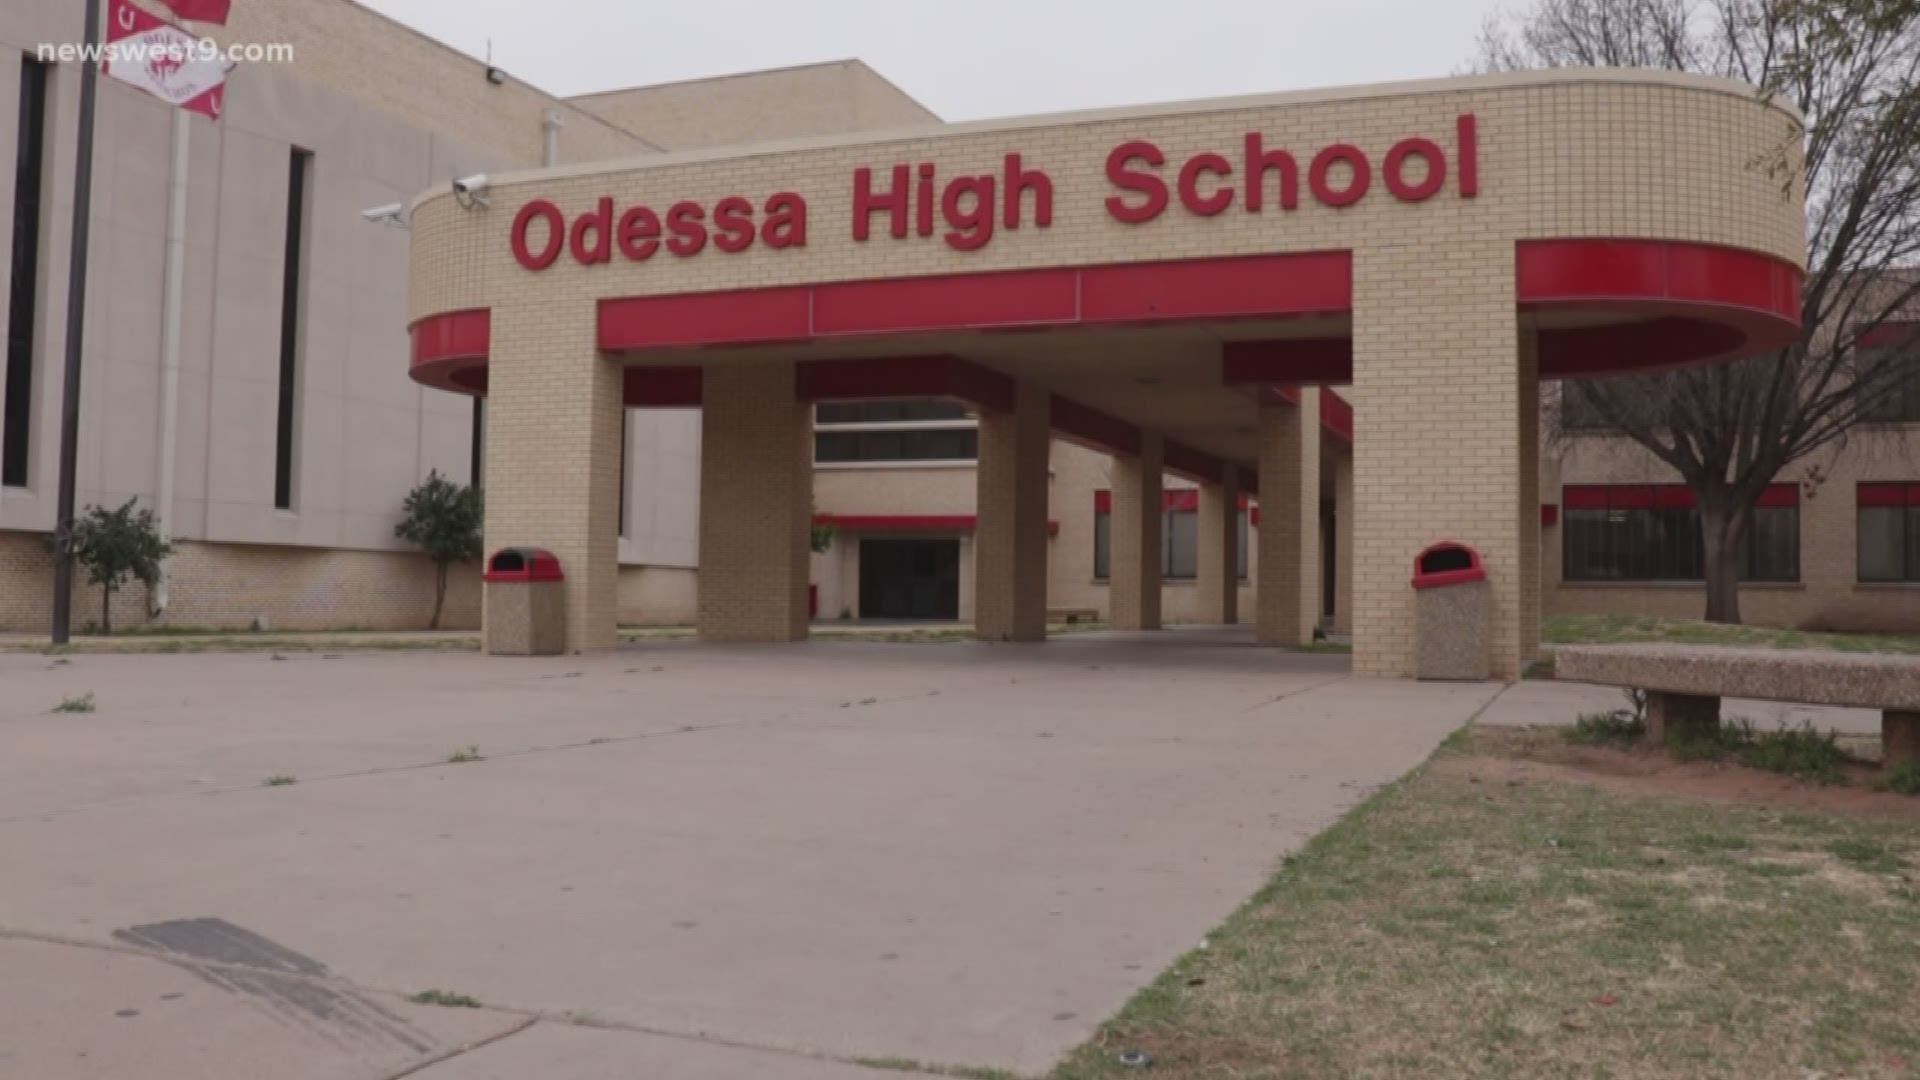 The New York Times to honor Odessa High School with virtual live